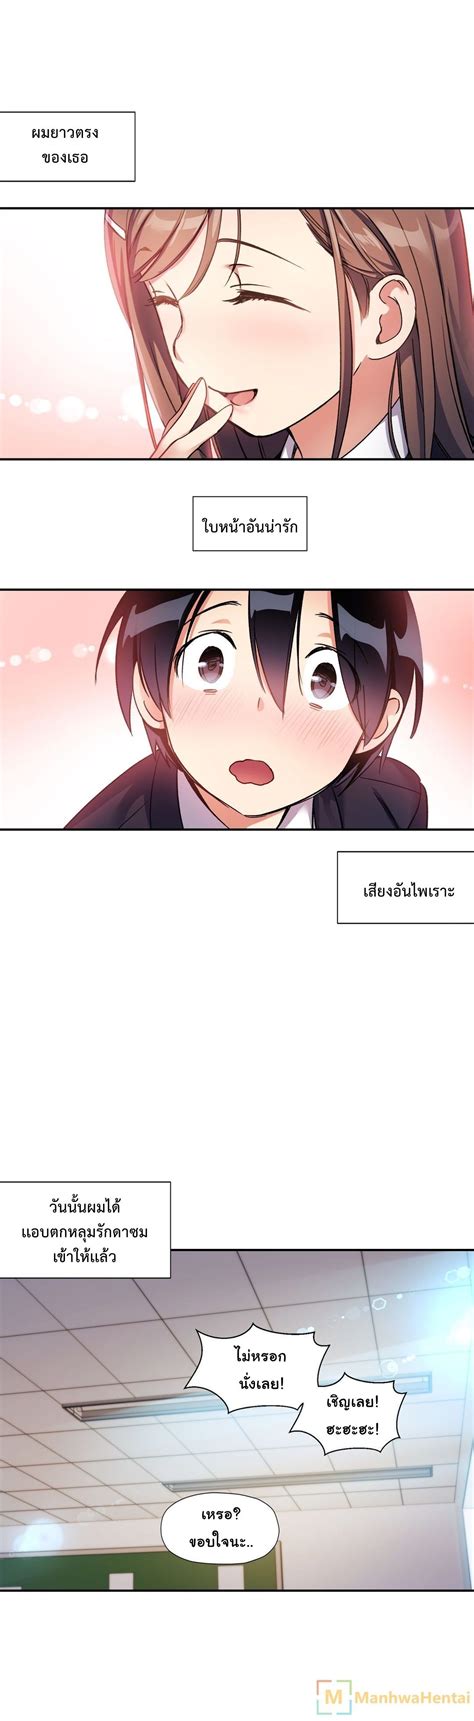 Under Observation My First Loves And I ตอนที่ 17 Th Mangathailand